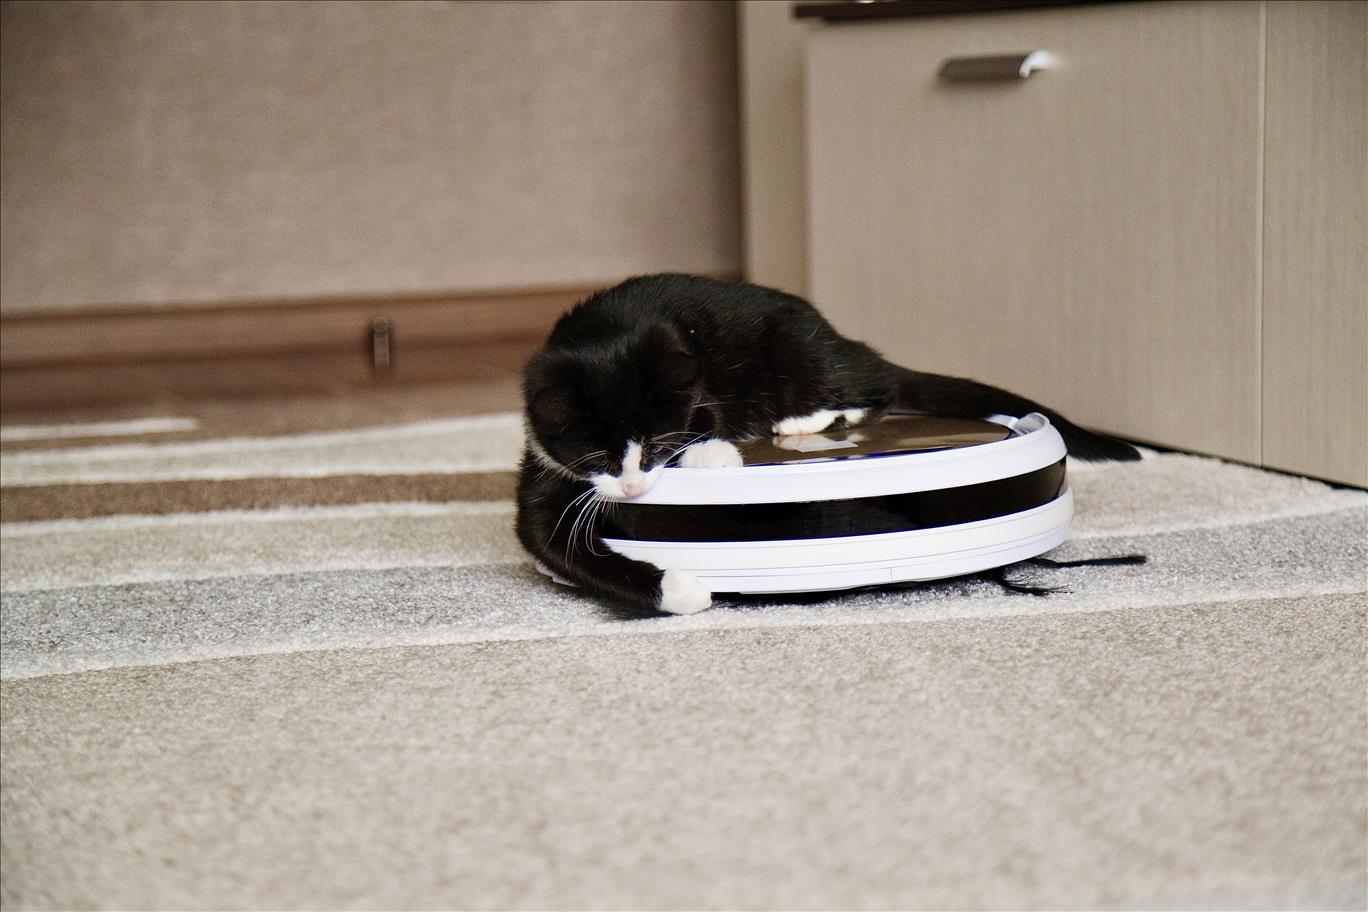 Irobot's Roomba Will Soon Be Owned By Amazon, Which Raises Privacy Questions